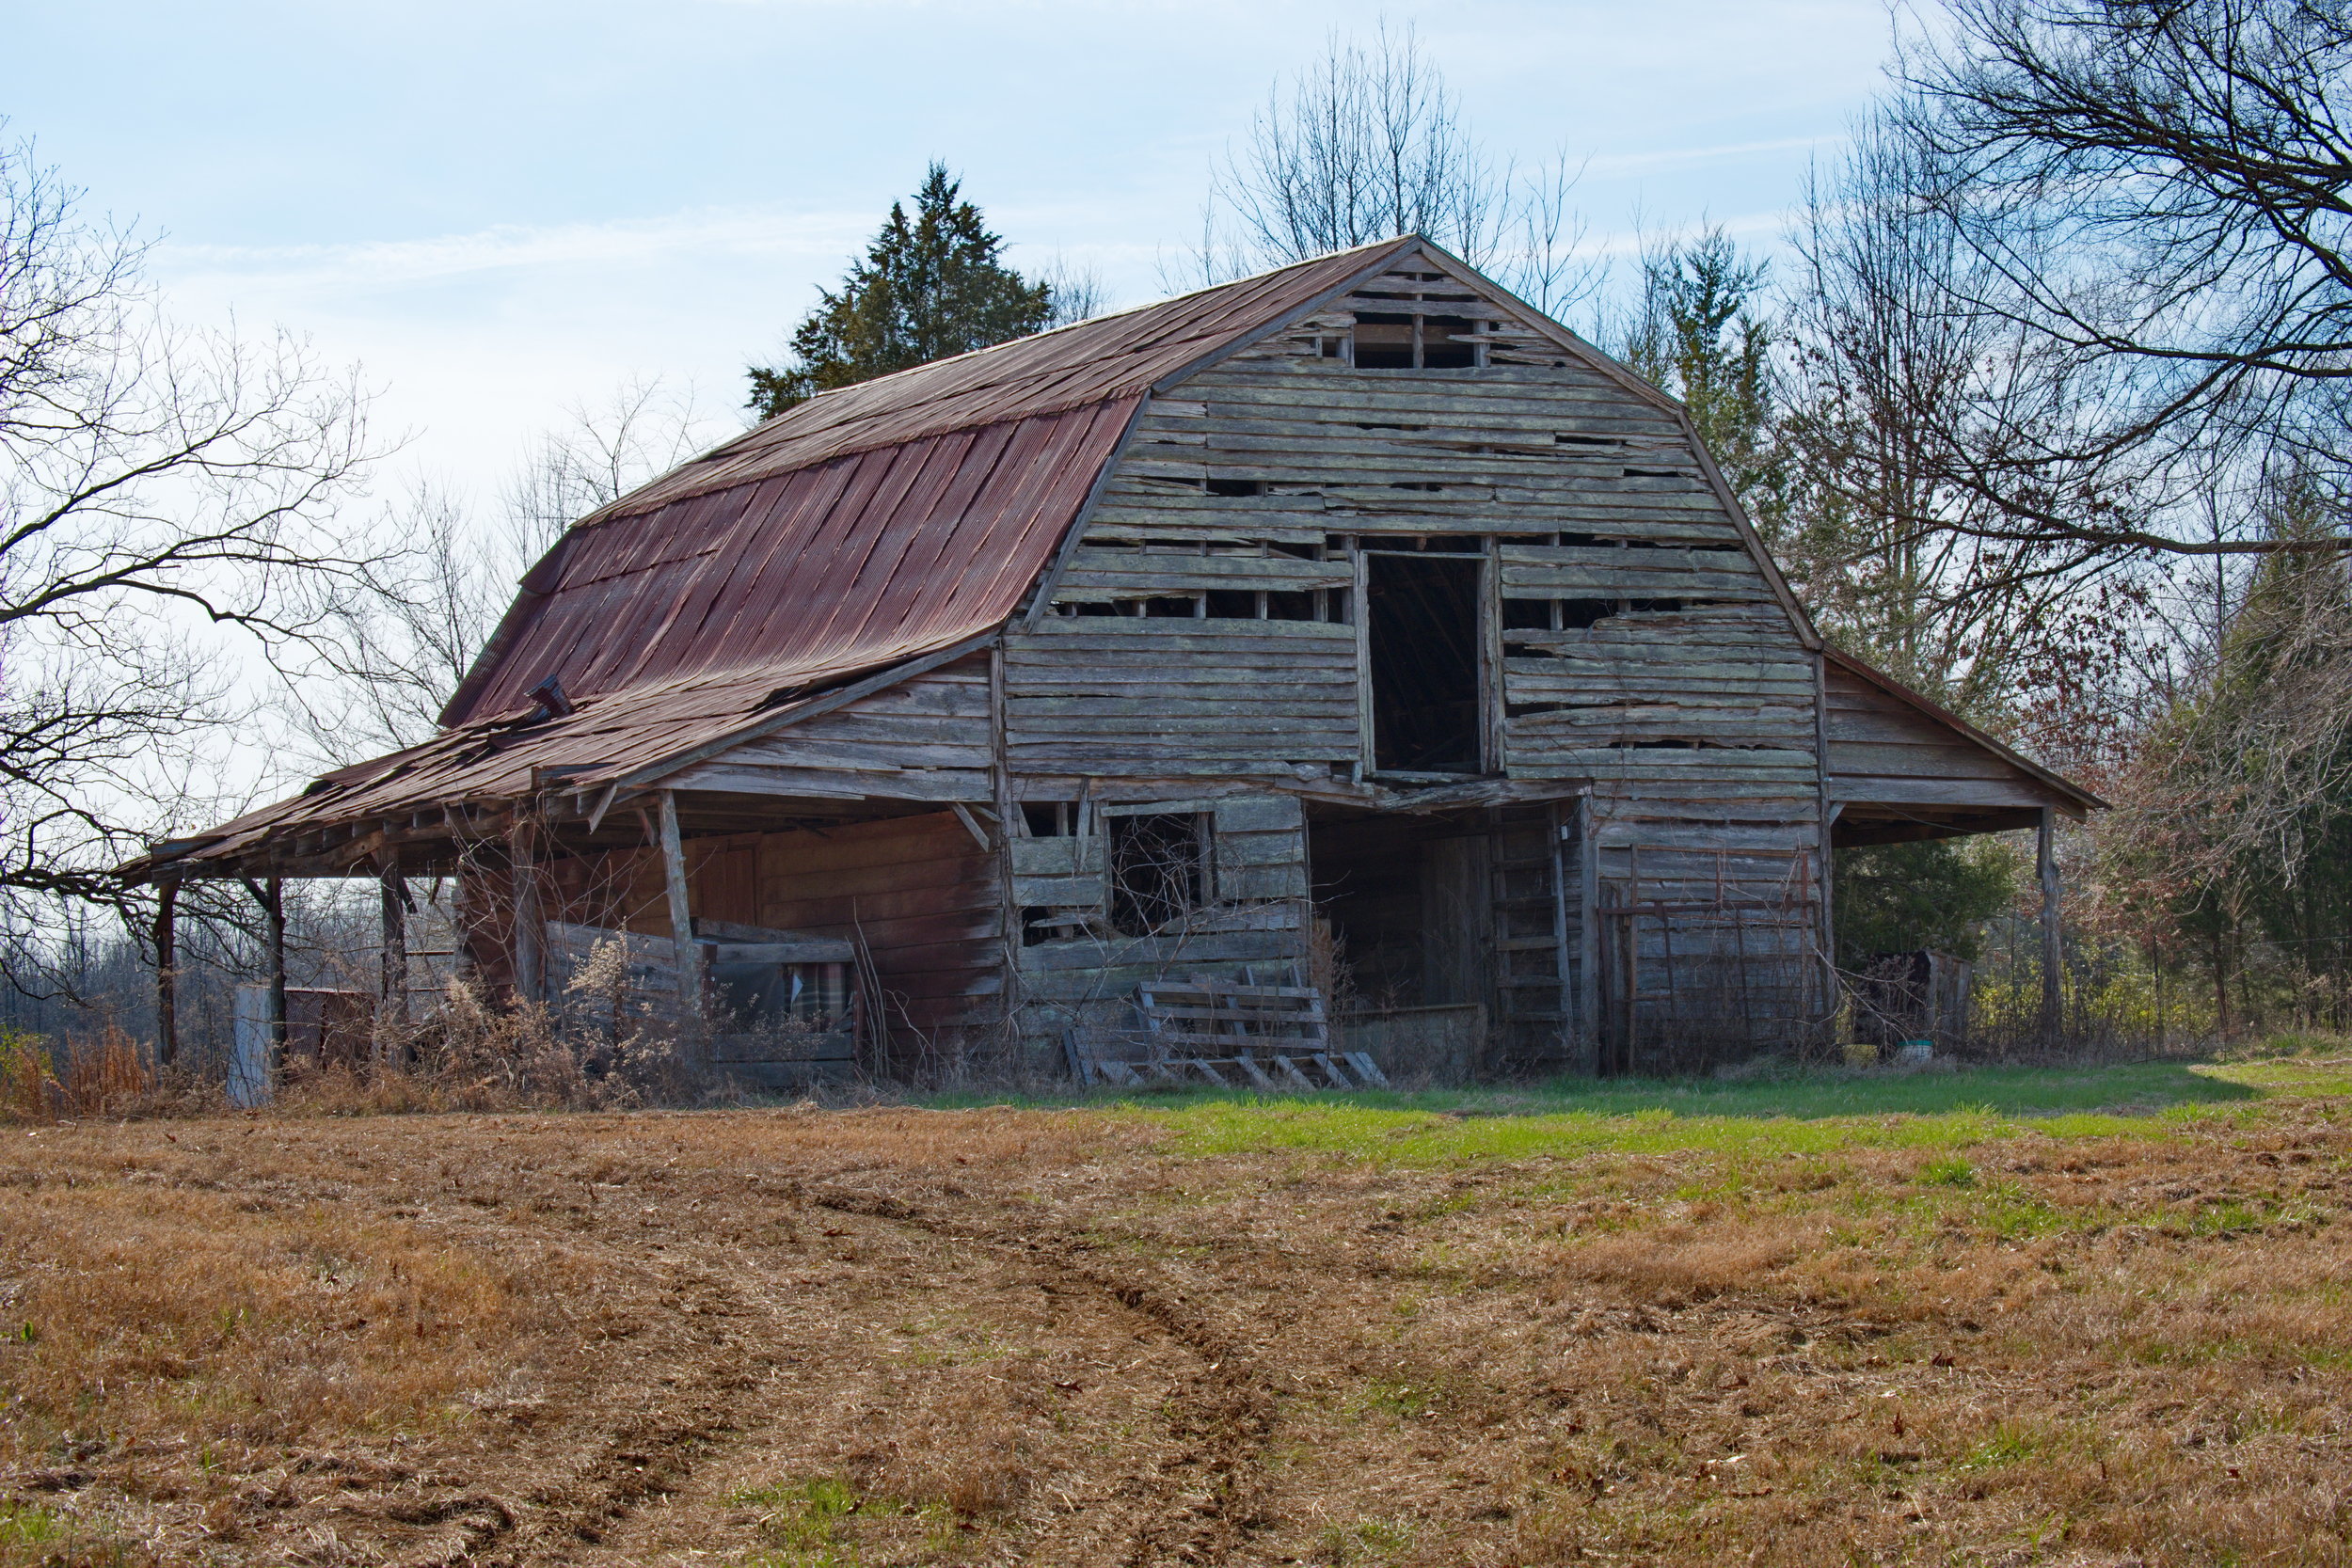  Old barns always make for good subjects 